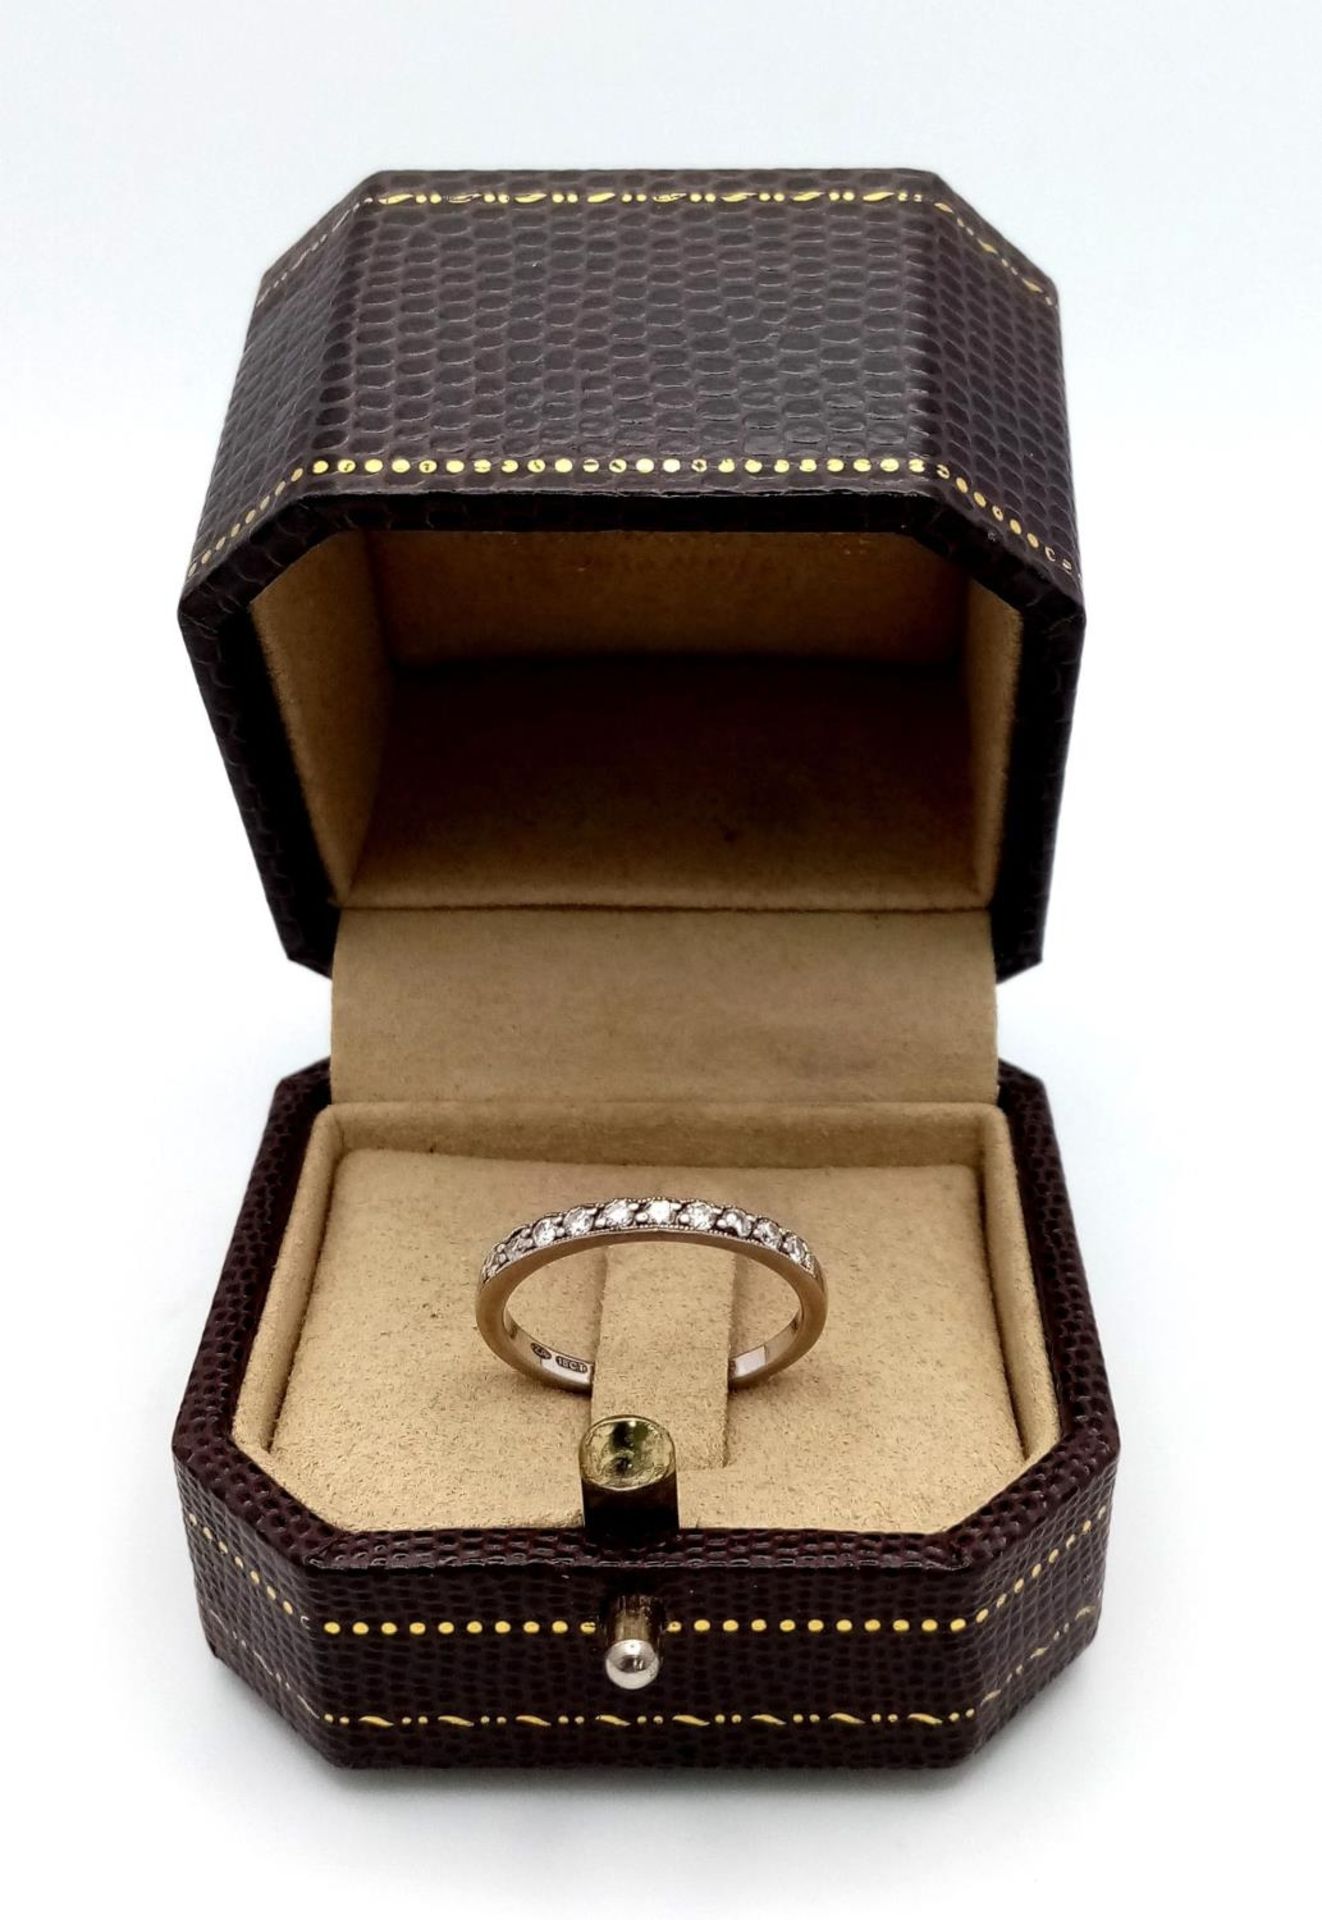 A Brown's Designer 18K White Gold and Diamond Half Eternity Ring. Size M. Comes with a Browns box. - Image 6 of 6